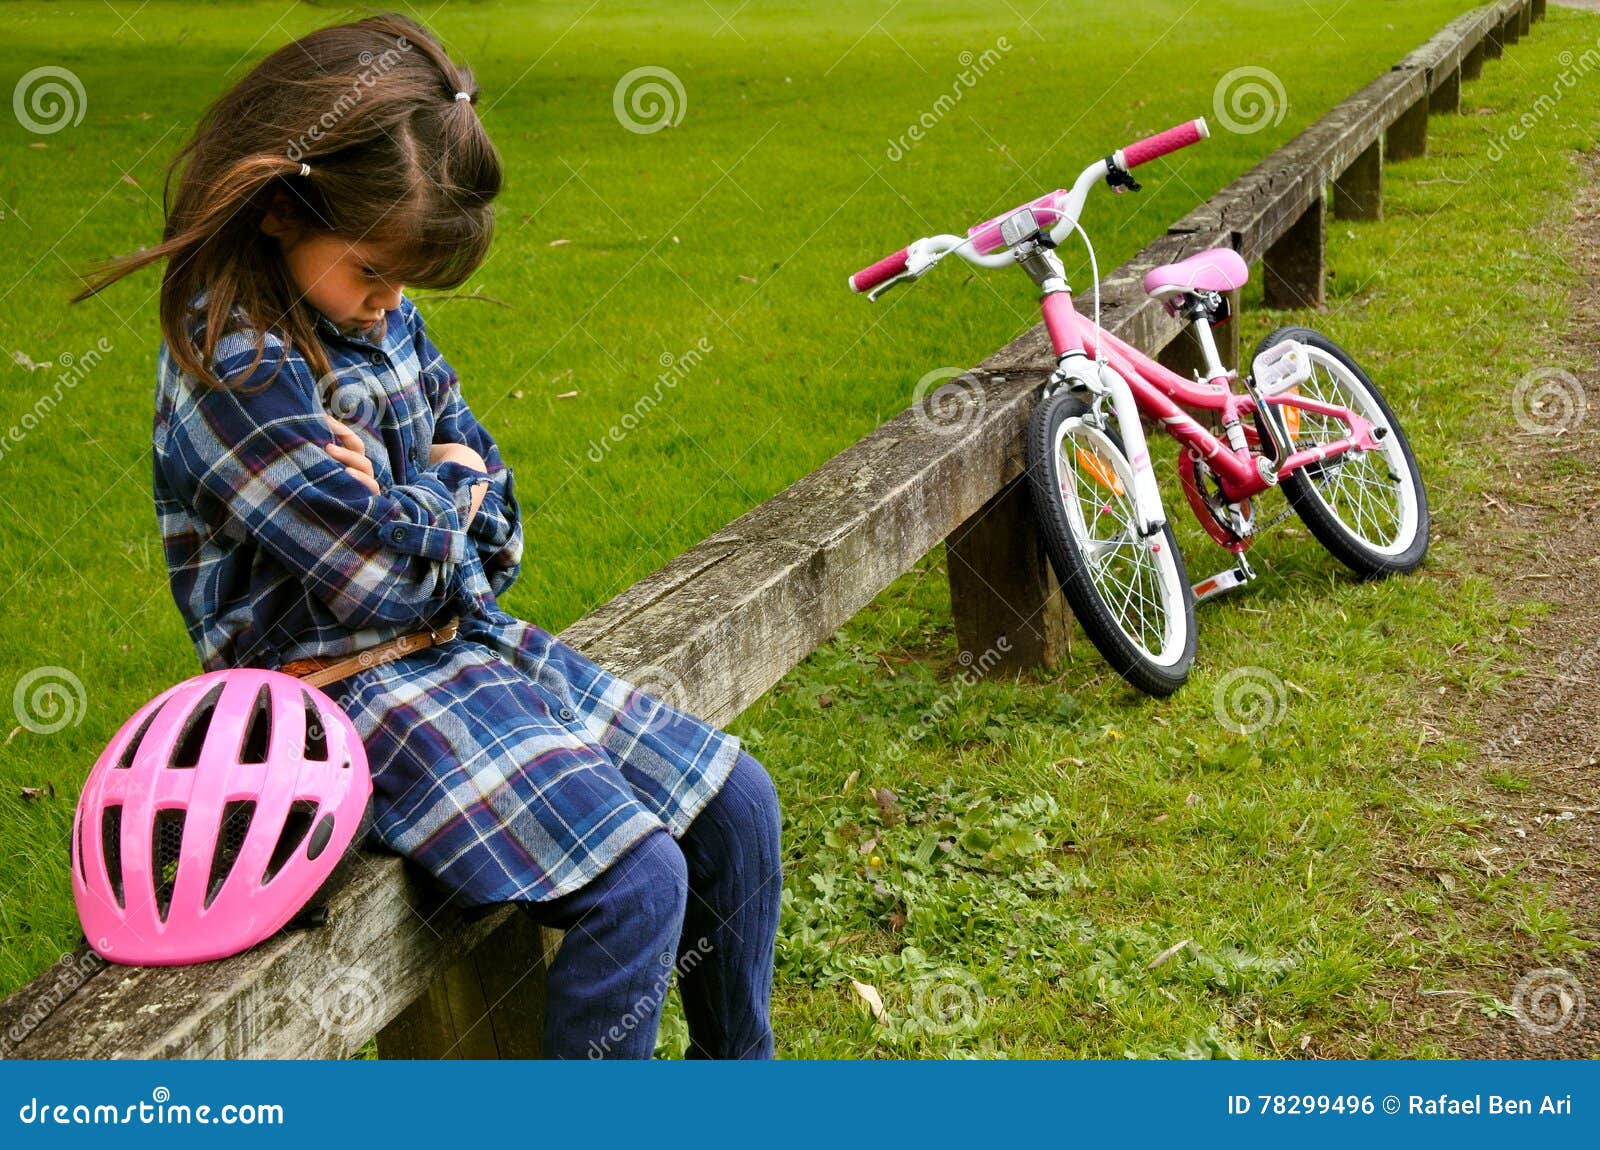 sad little girl do not know how to ride a bike